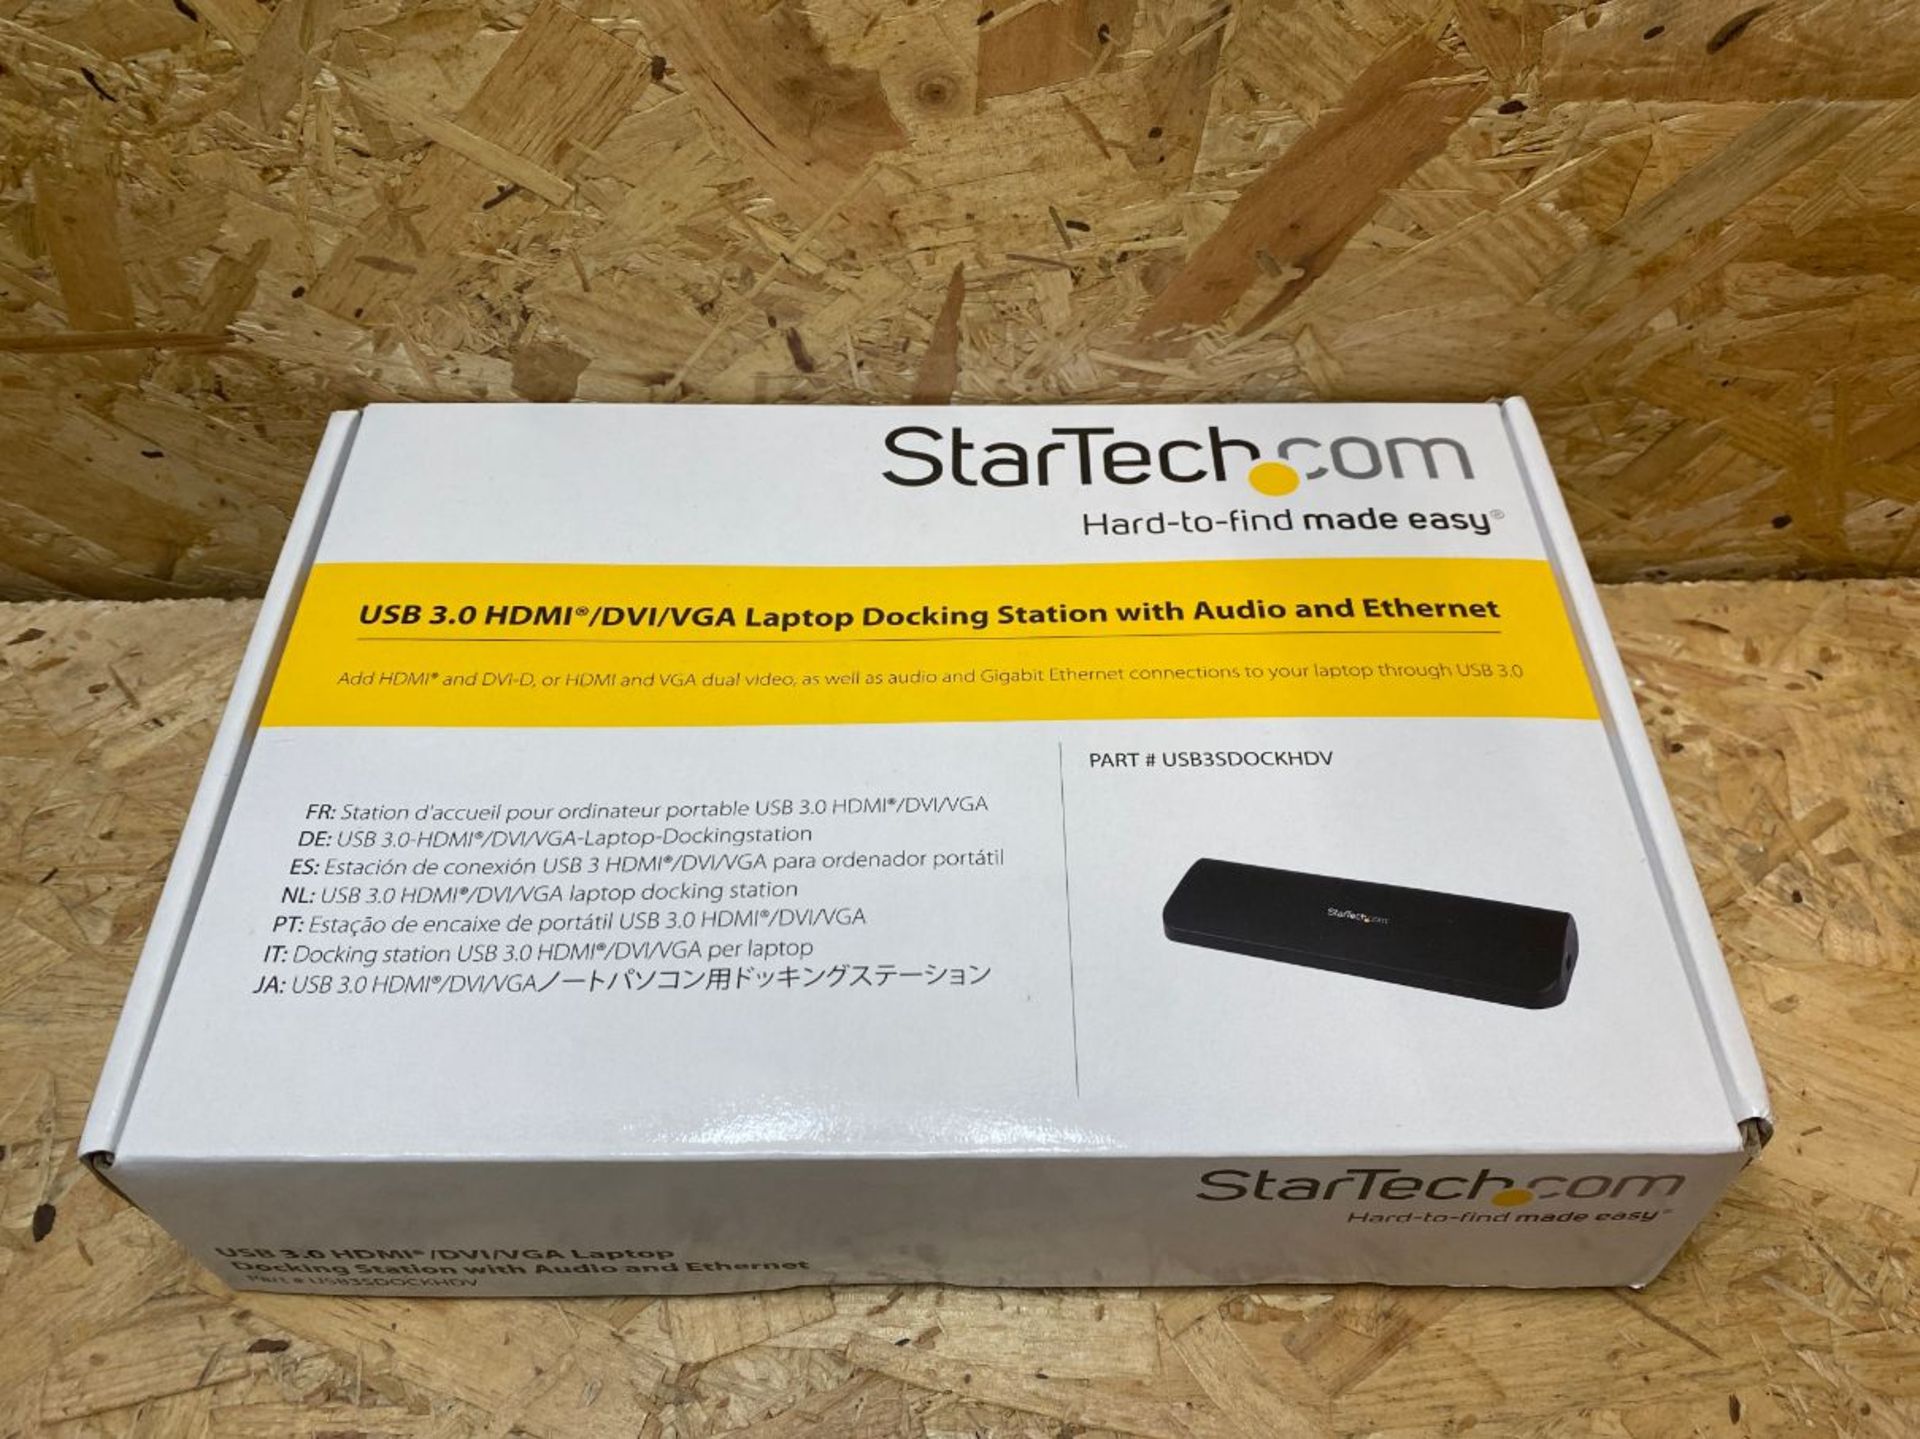 1 X STARTECH.COM USB 3.0 HDMI LAPTOP DOCKING STATION WITH AUDIO AND ETHERNET / RRP £104.99